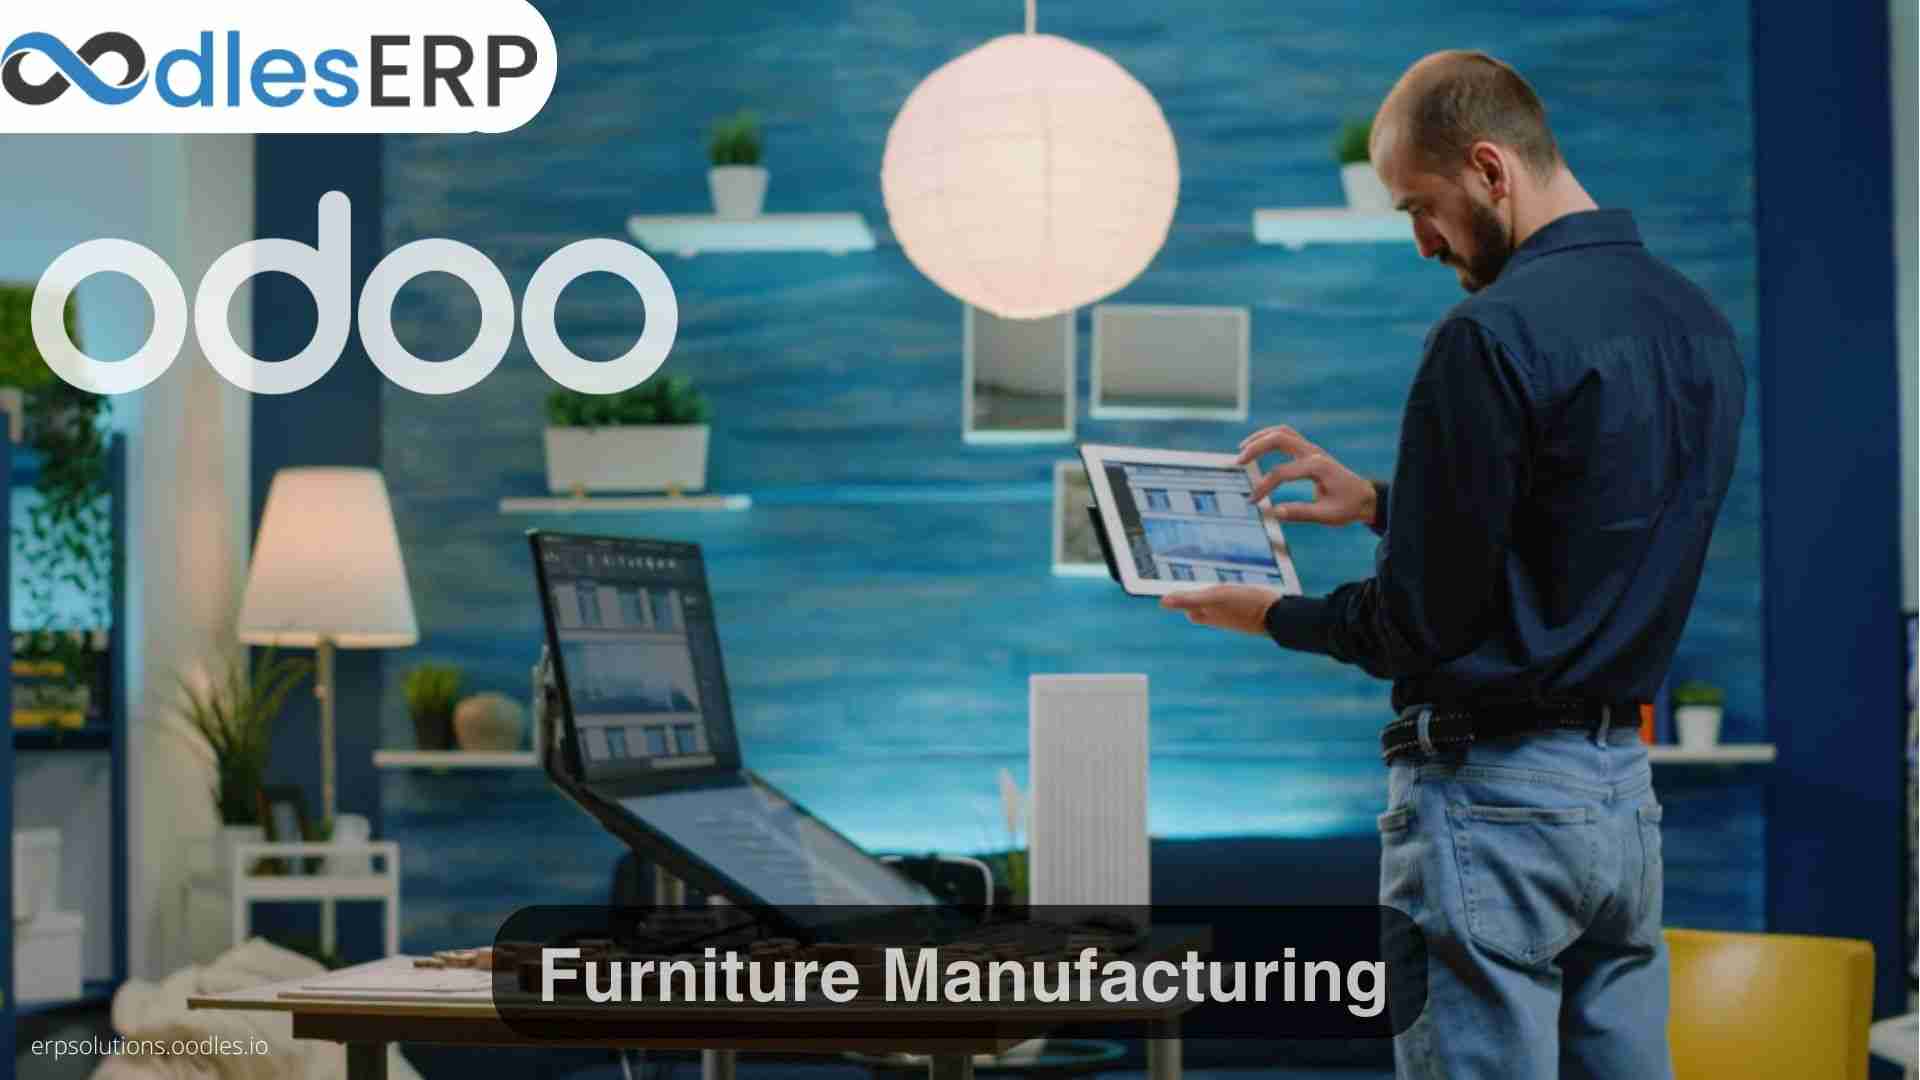 The Significance of Odoo ERP for Furniture Manufacturing